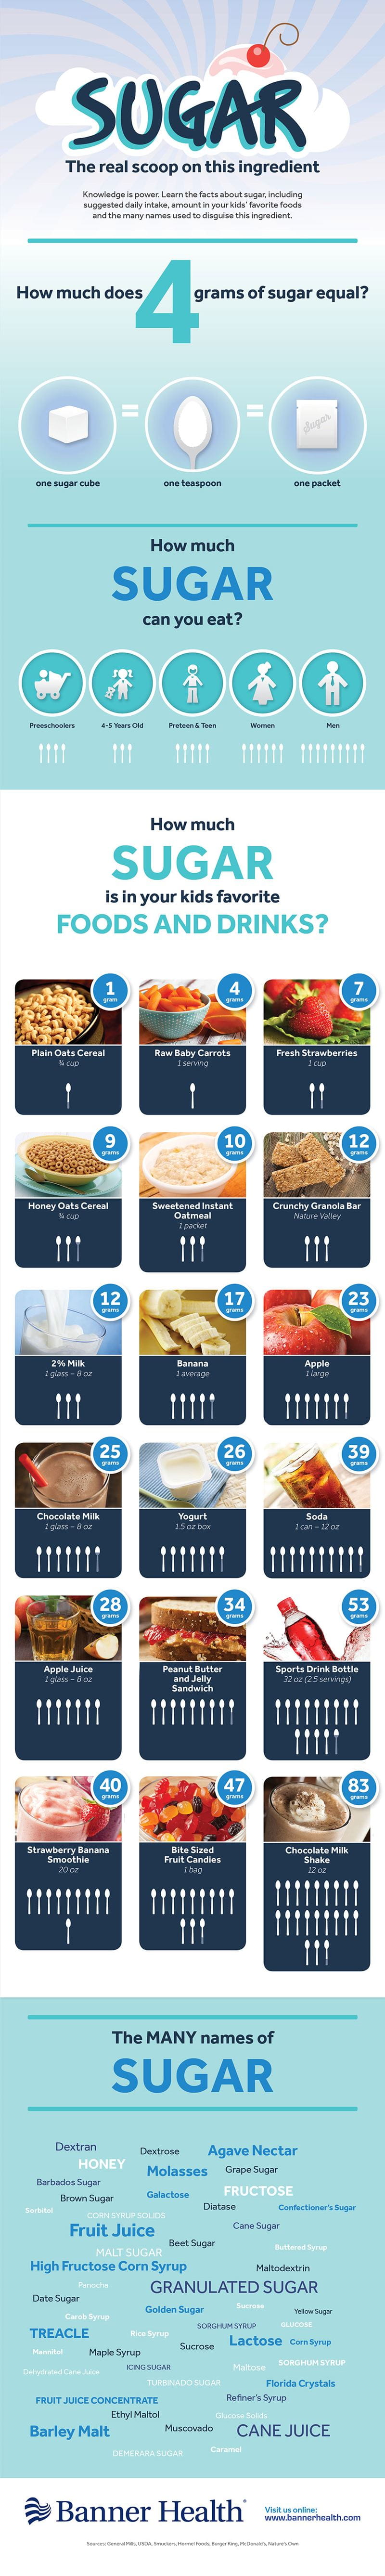 Sugar-Content-Infographic_ENG_L1